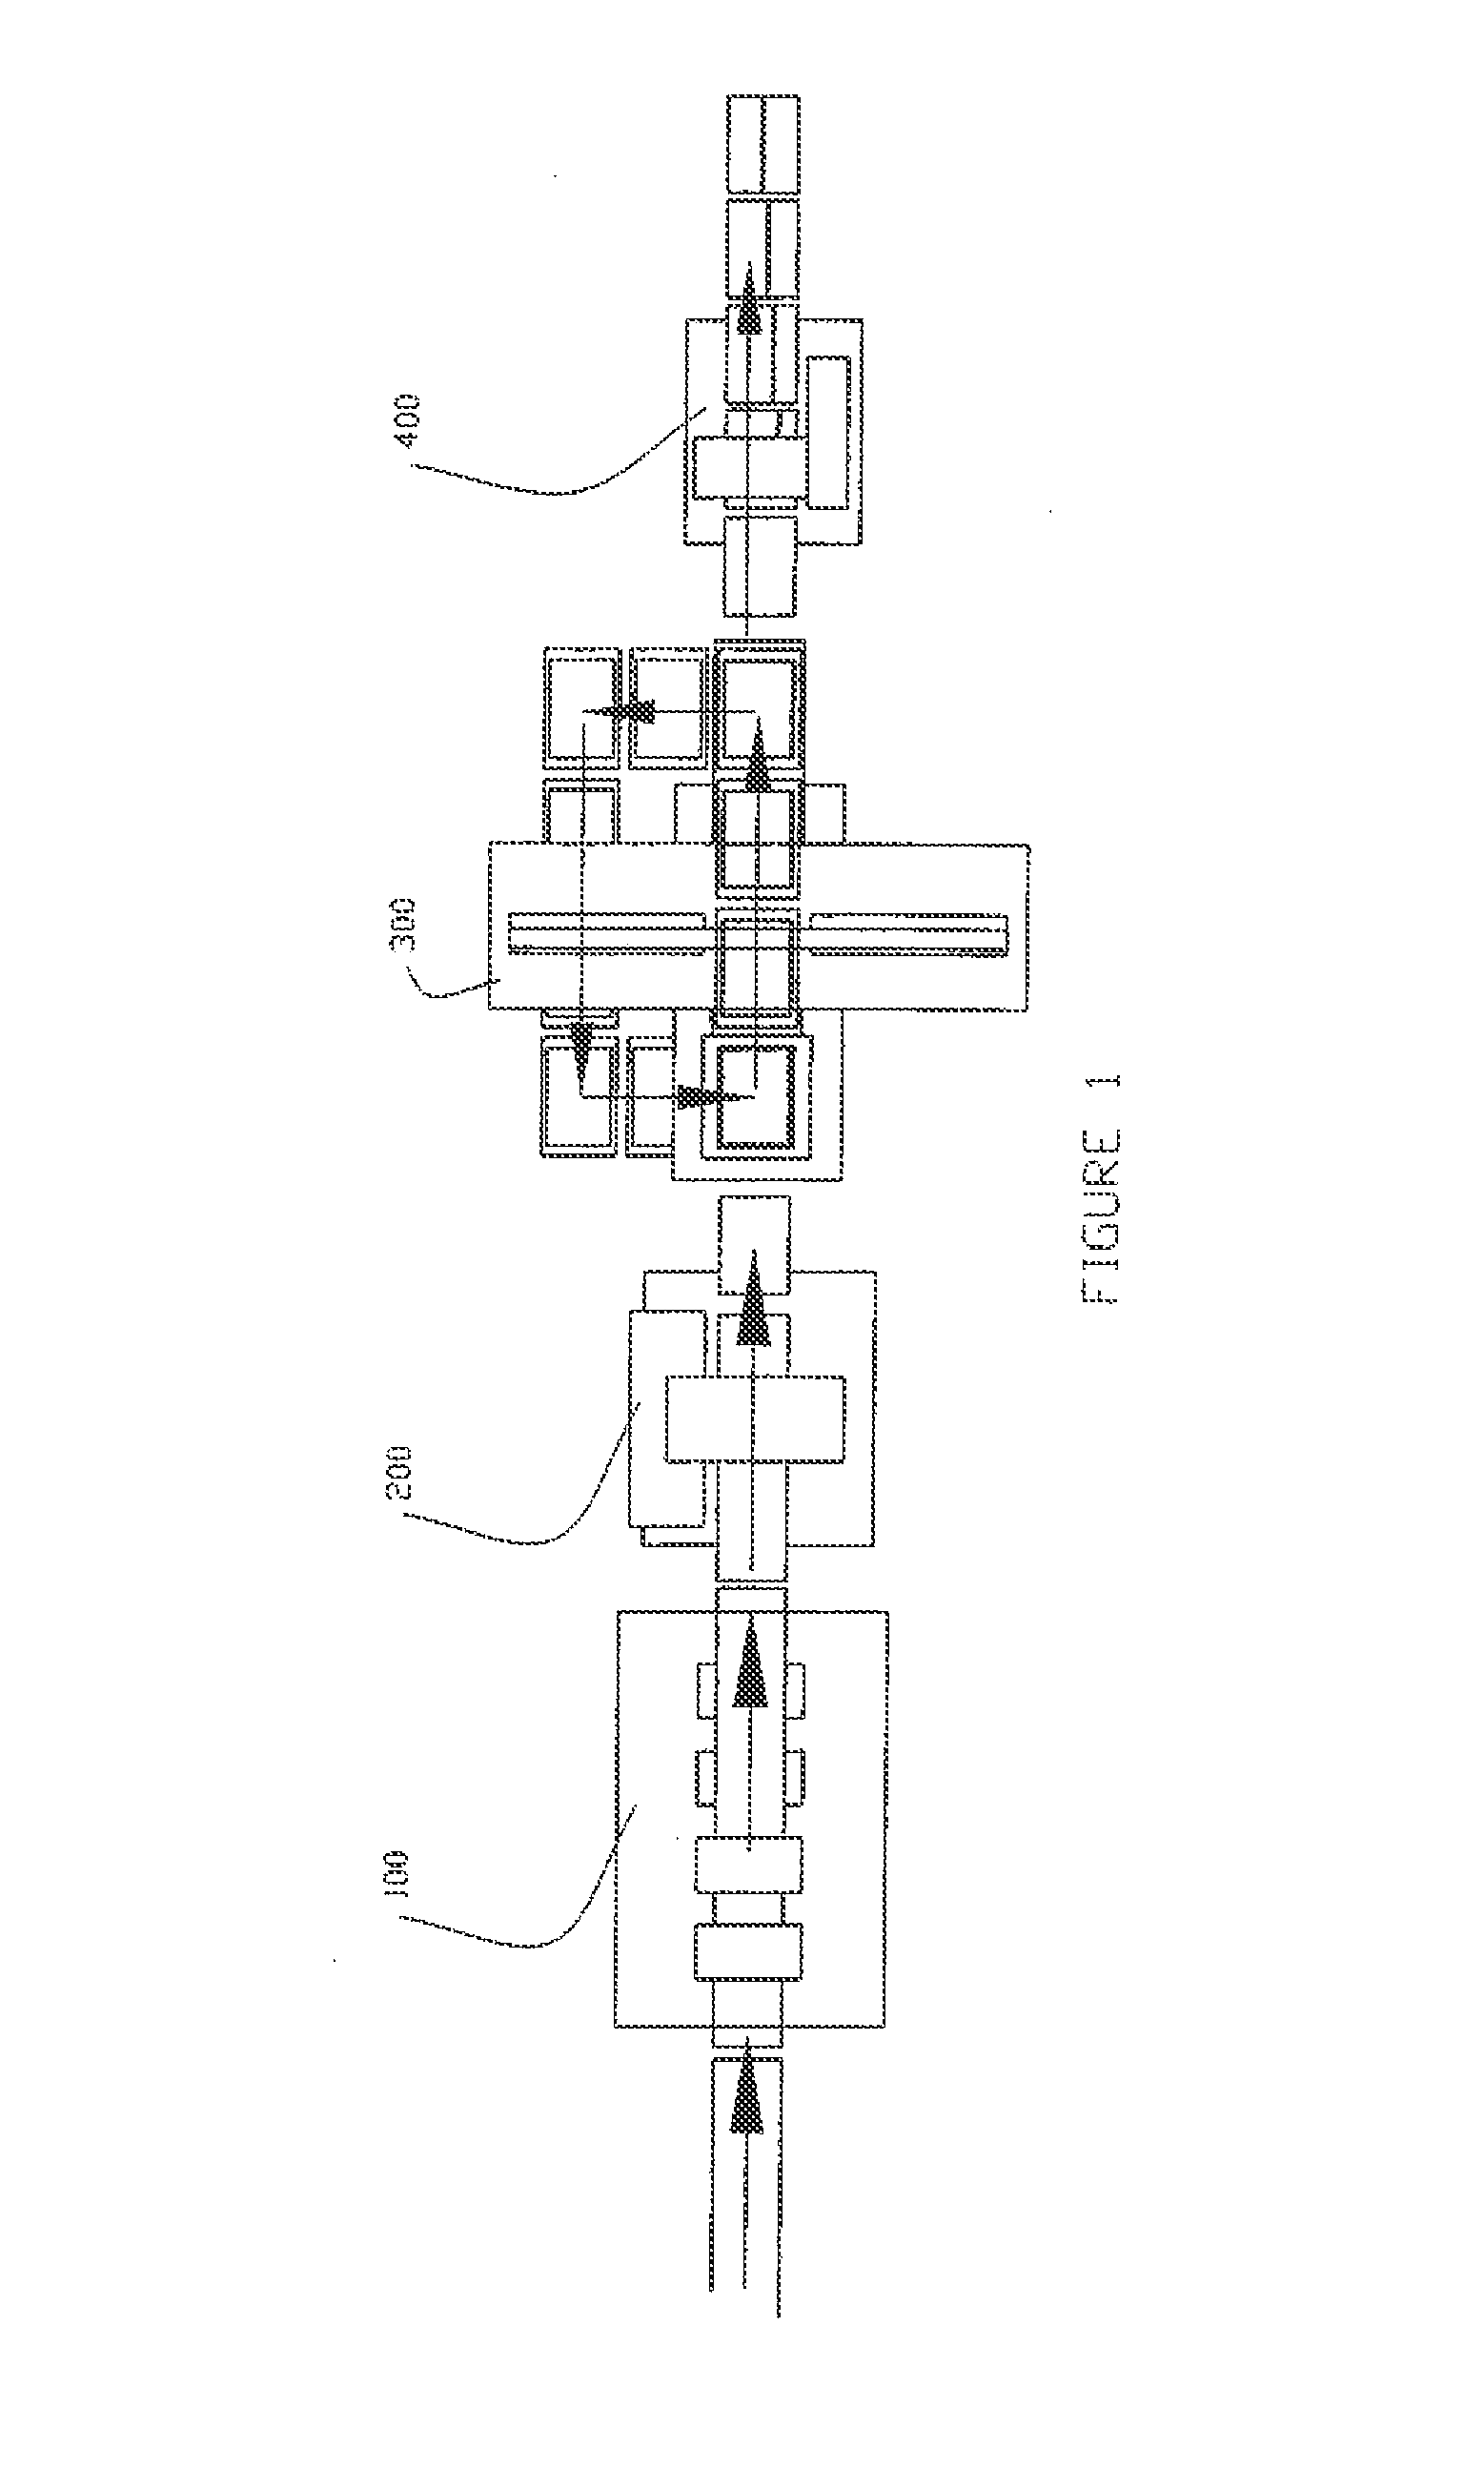 Apparatus and method of manufacturing shingles from cellular polyvinyl chloride